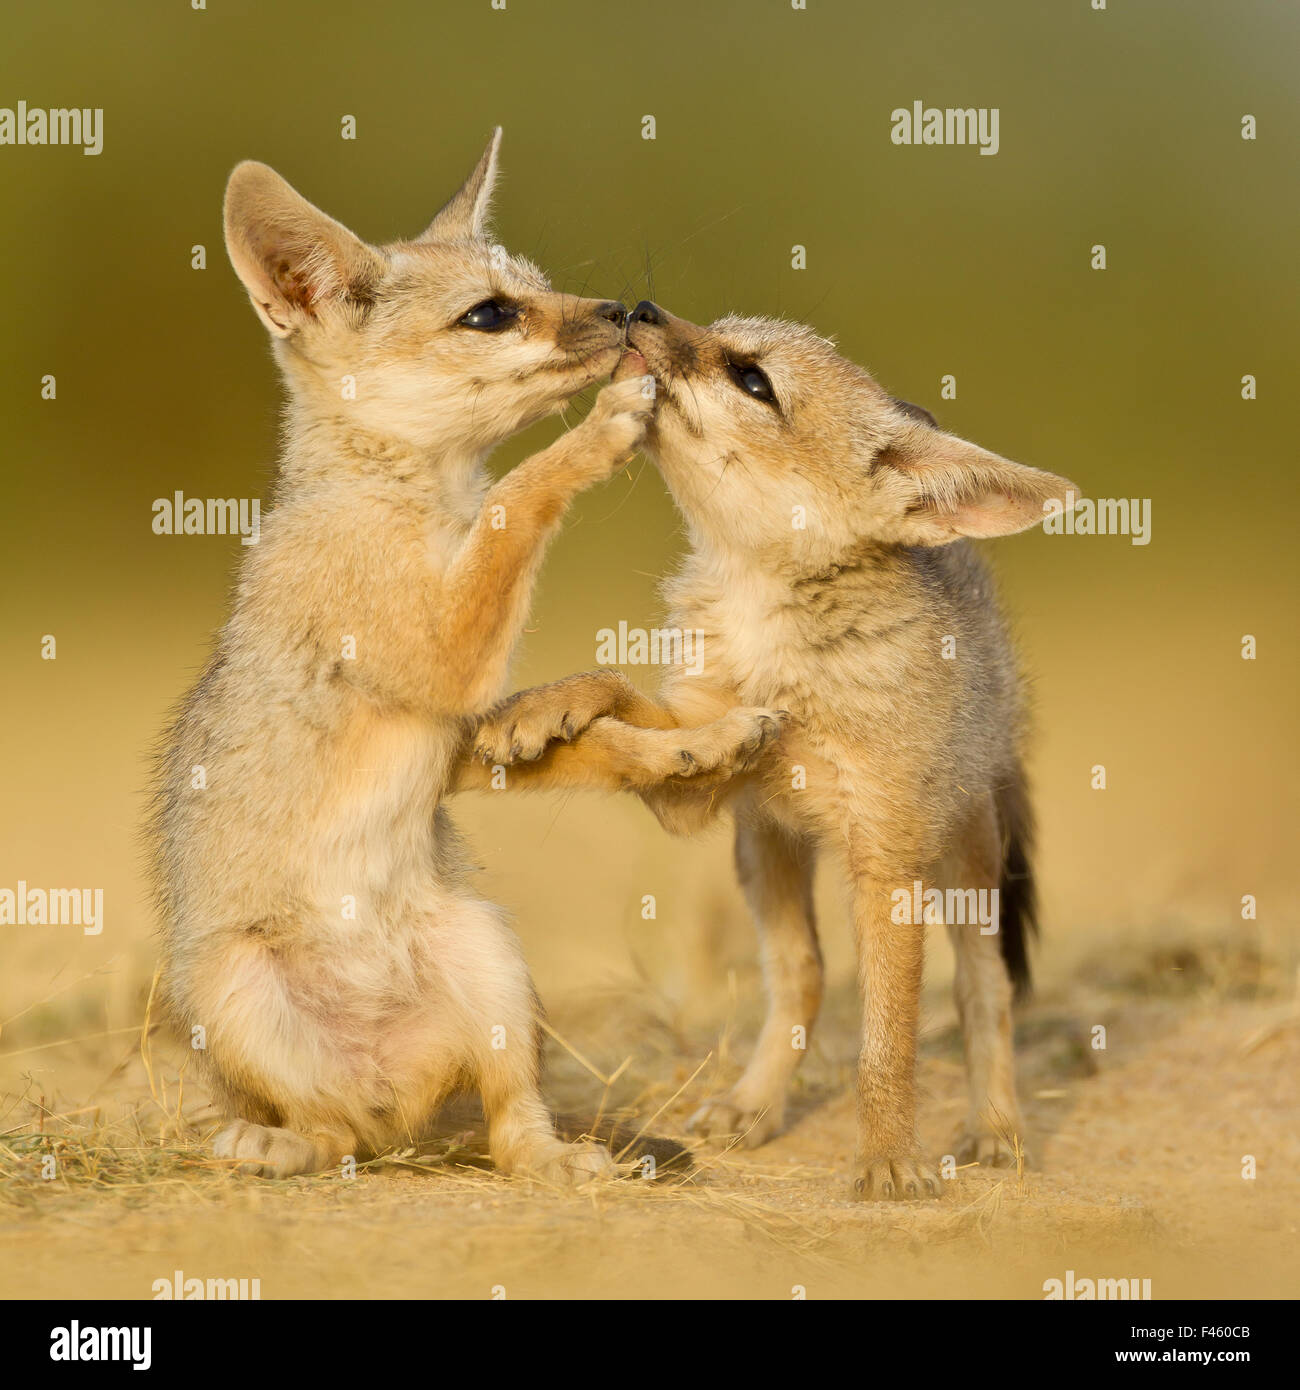 Indian fox (Vulpes bengalensis) pups at play by a den in the Little Rann, Kutch, Gujarat, India.  Honorable mention in the Land Mammals category of the BigPicture Competition 2014. Stock Photo